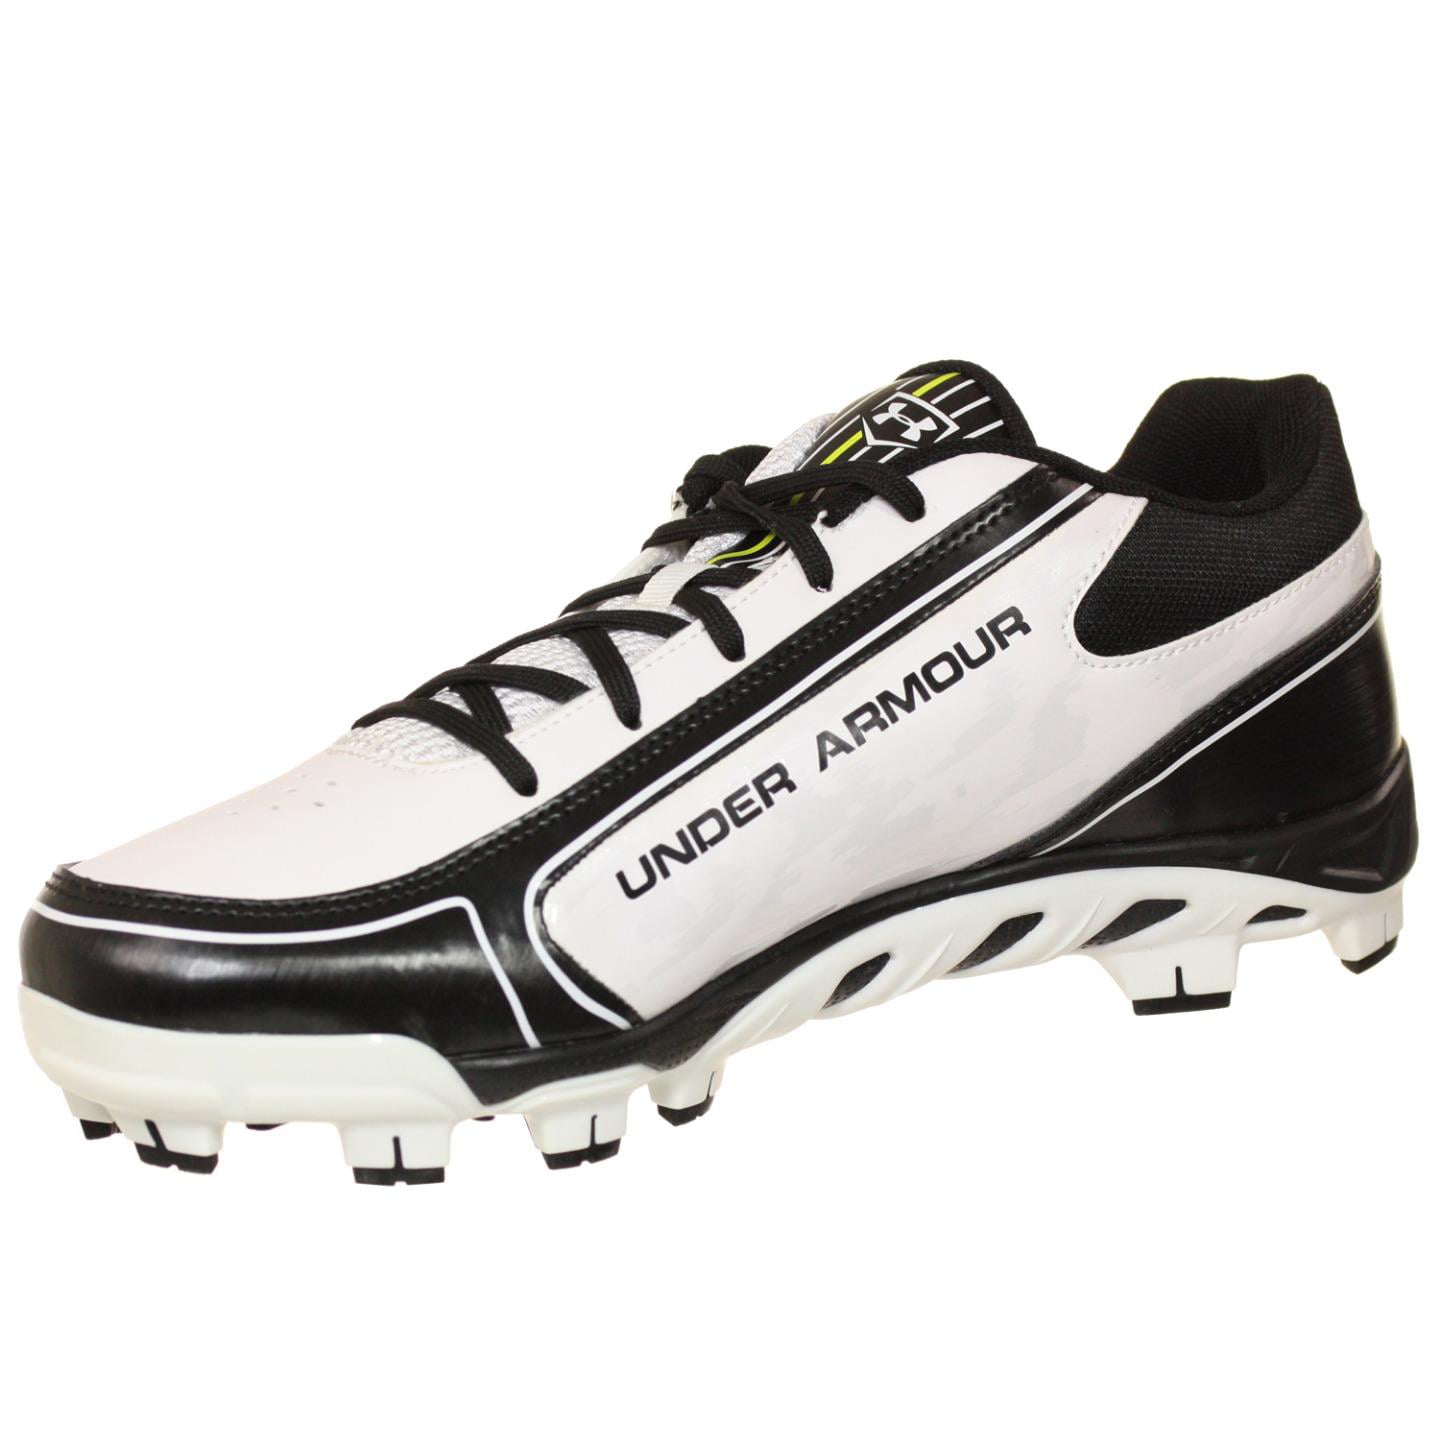 Under Armour New Glyde lV TPU CC Womens 6.5 Softball Molded Cleats Black/White